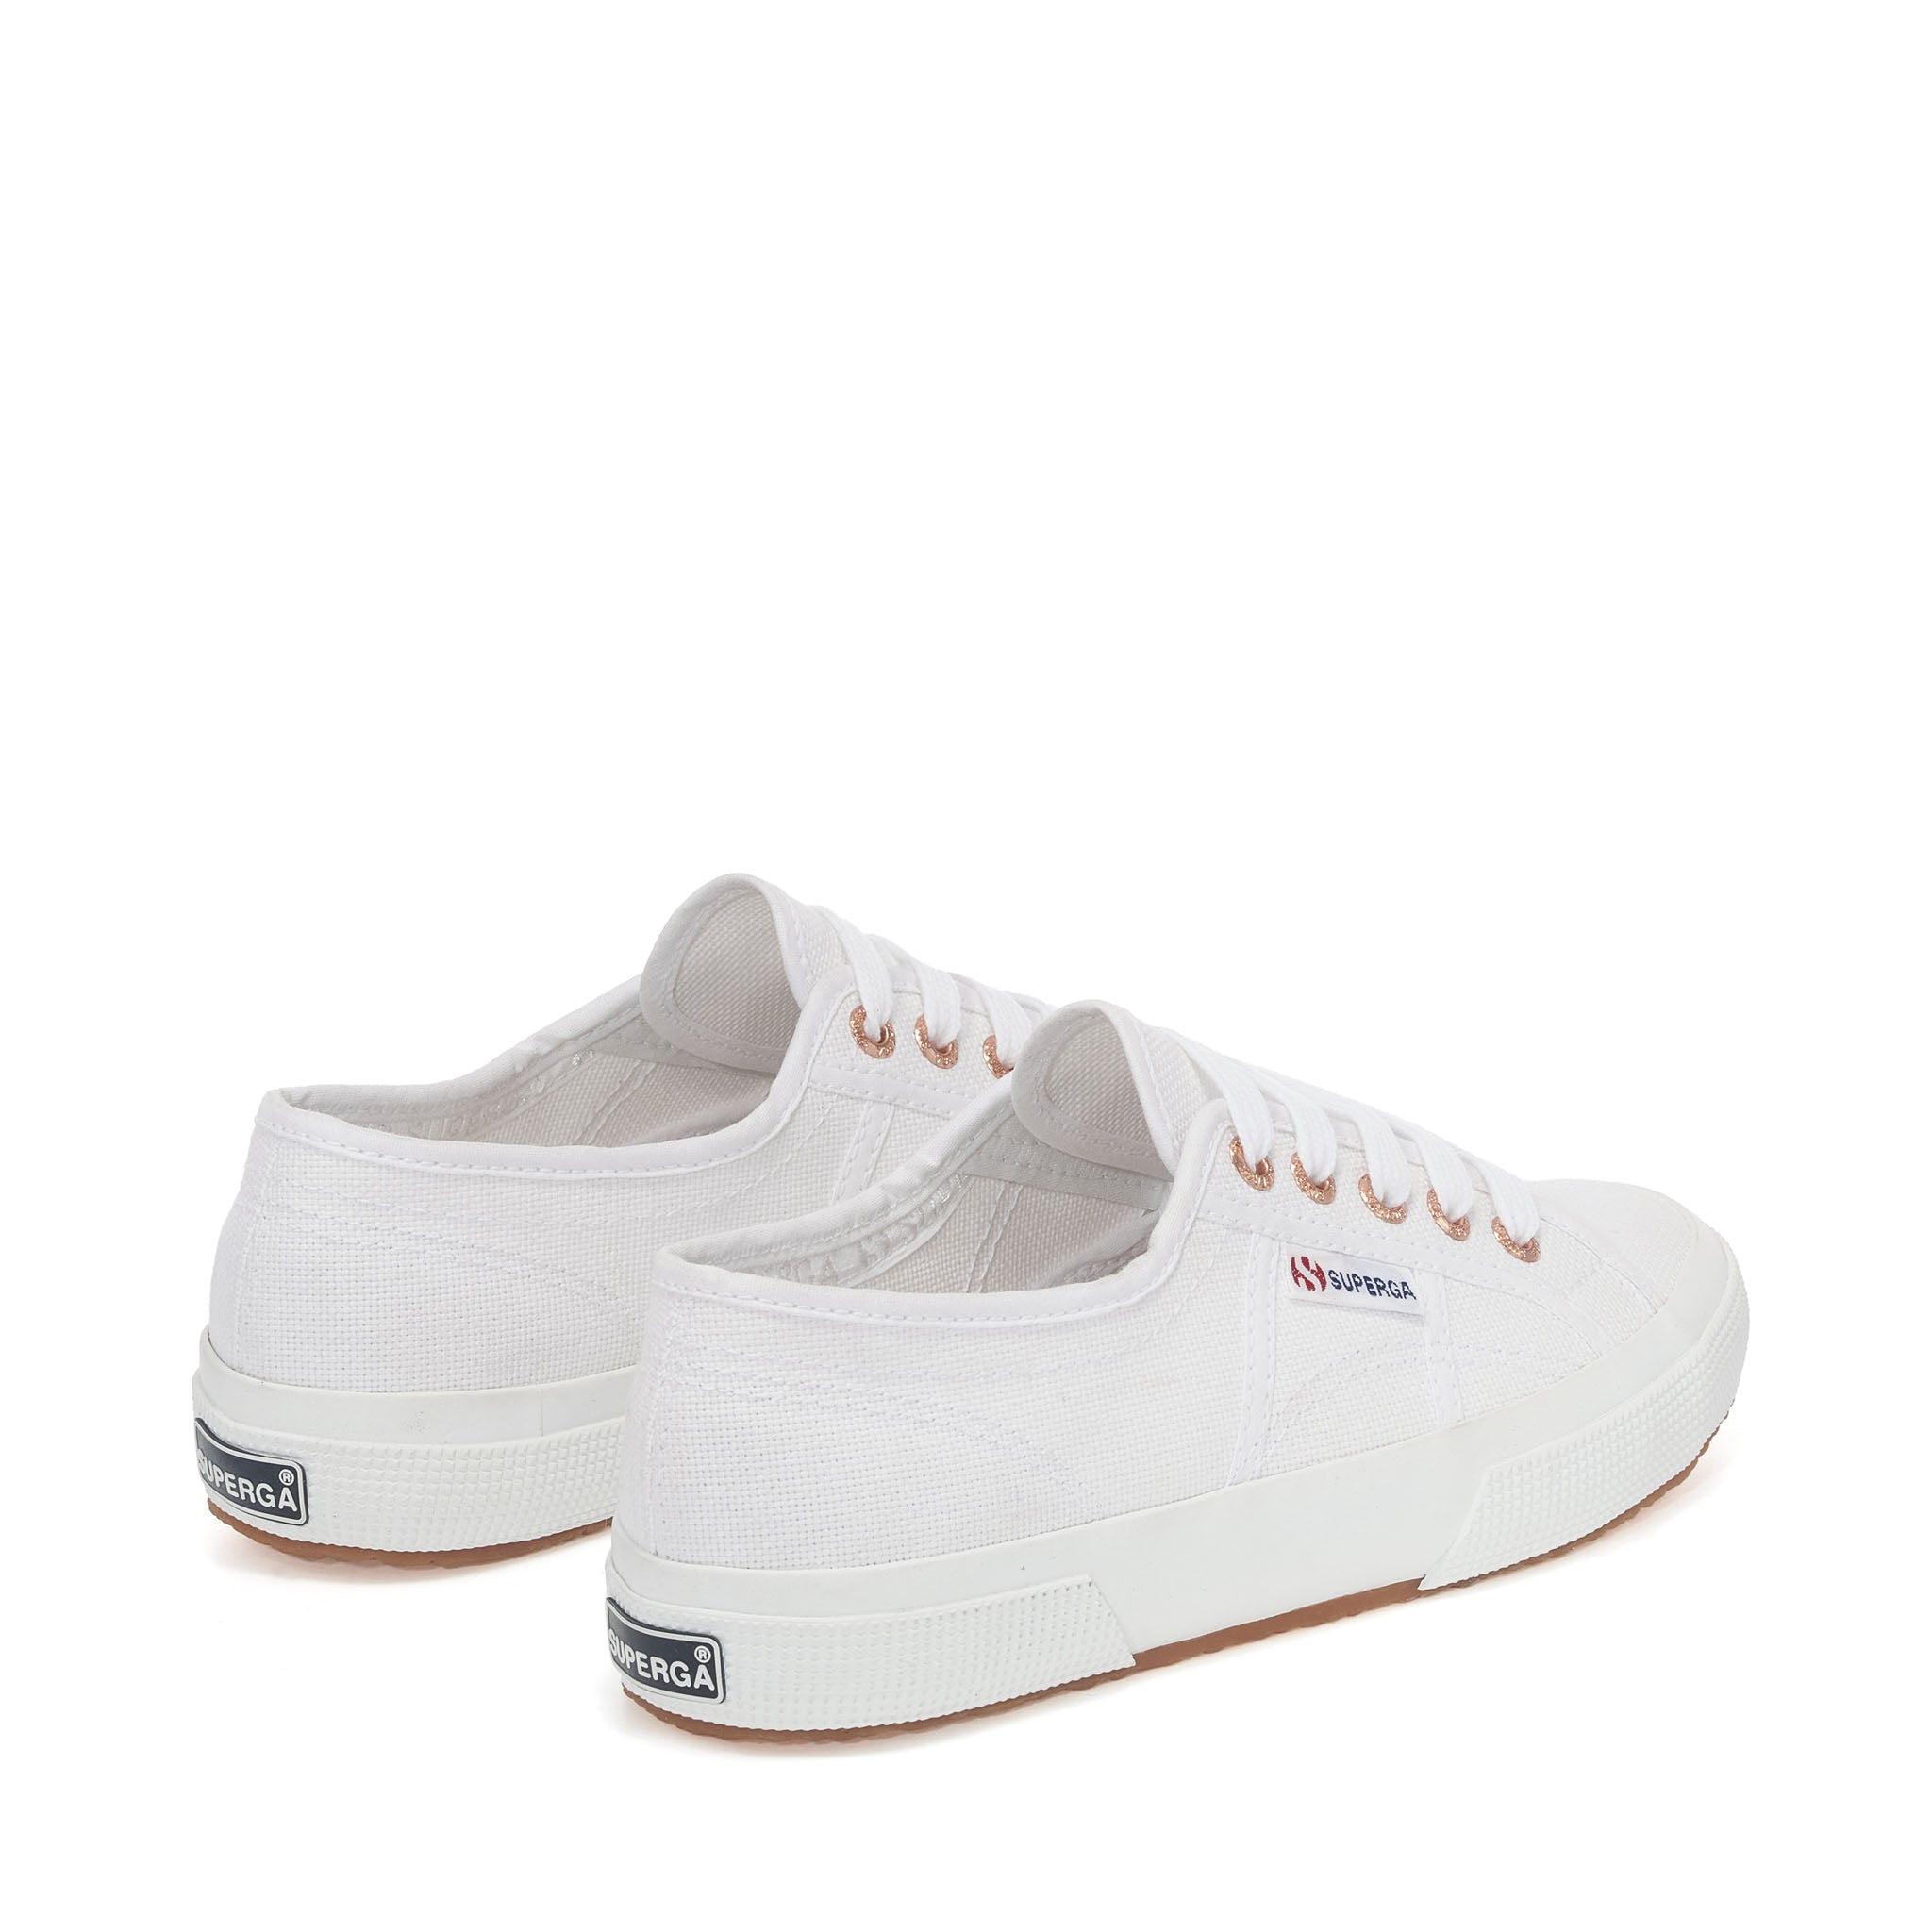 Superga 2750 Cotu Classic Sneakers - White Rose Gold. Back view.